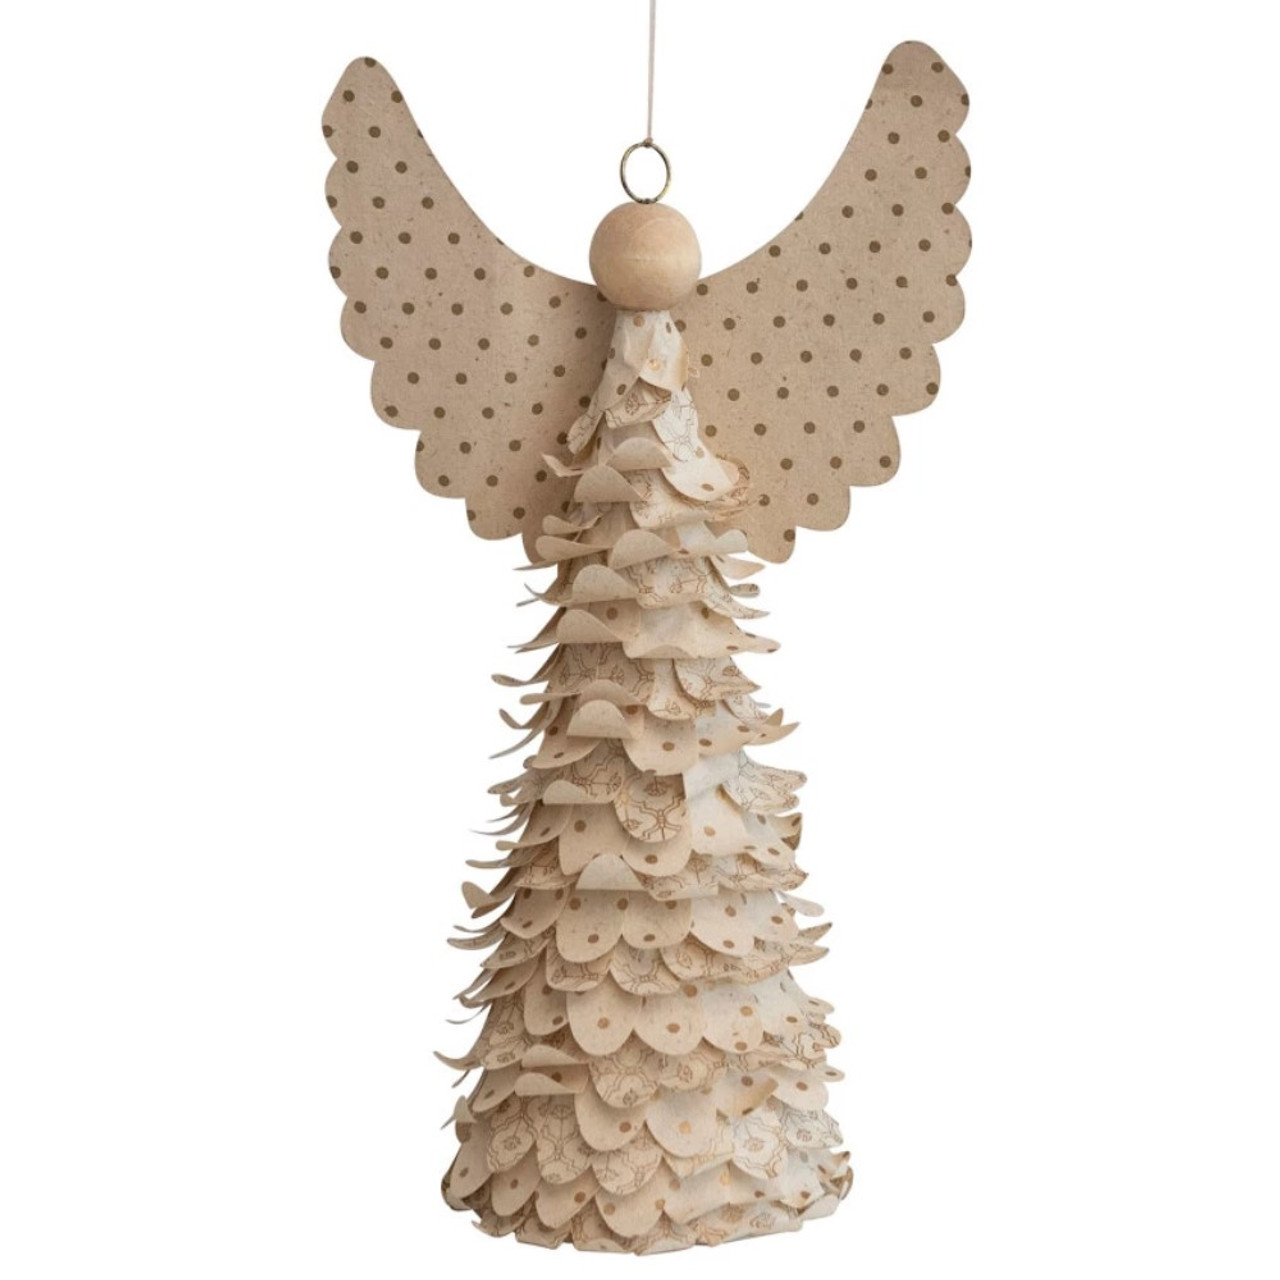 Handmade Recycled Paper Angel w/ Dots in Kraft Box, Cream & Gold Color 13.5 inch